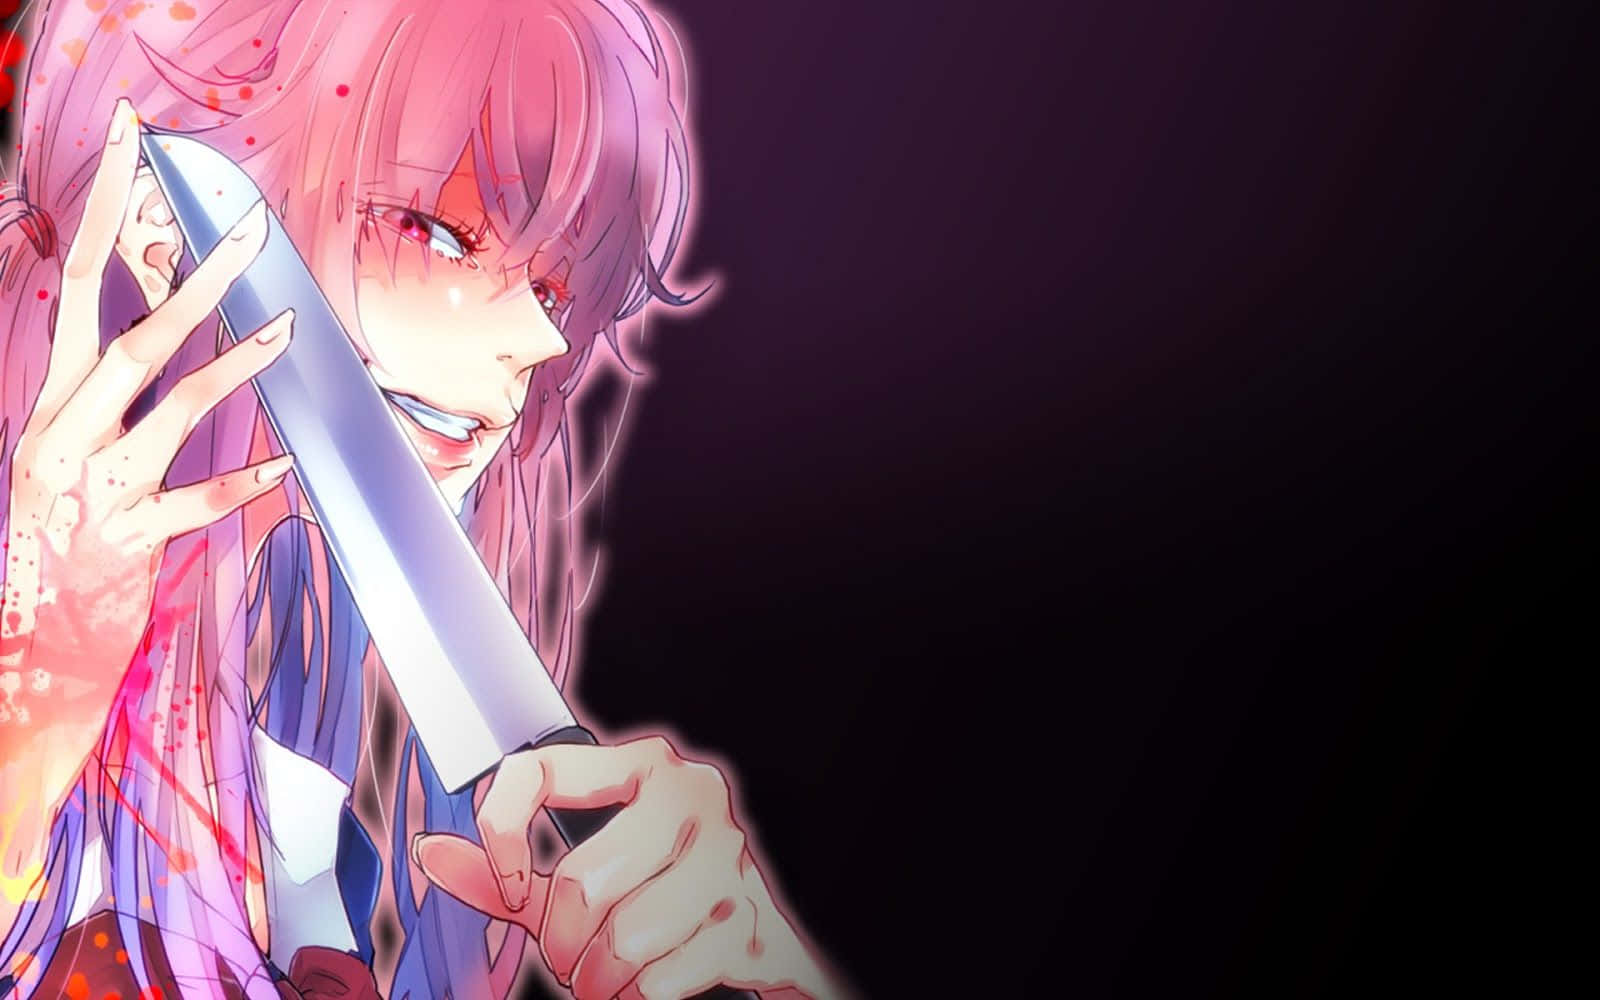 A Psycho Anime Girl, Lurking in the Shadows" Wallpaper